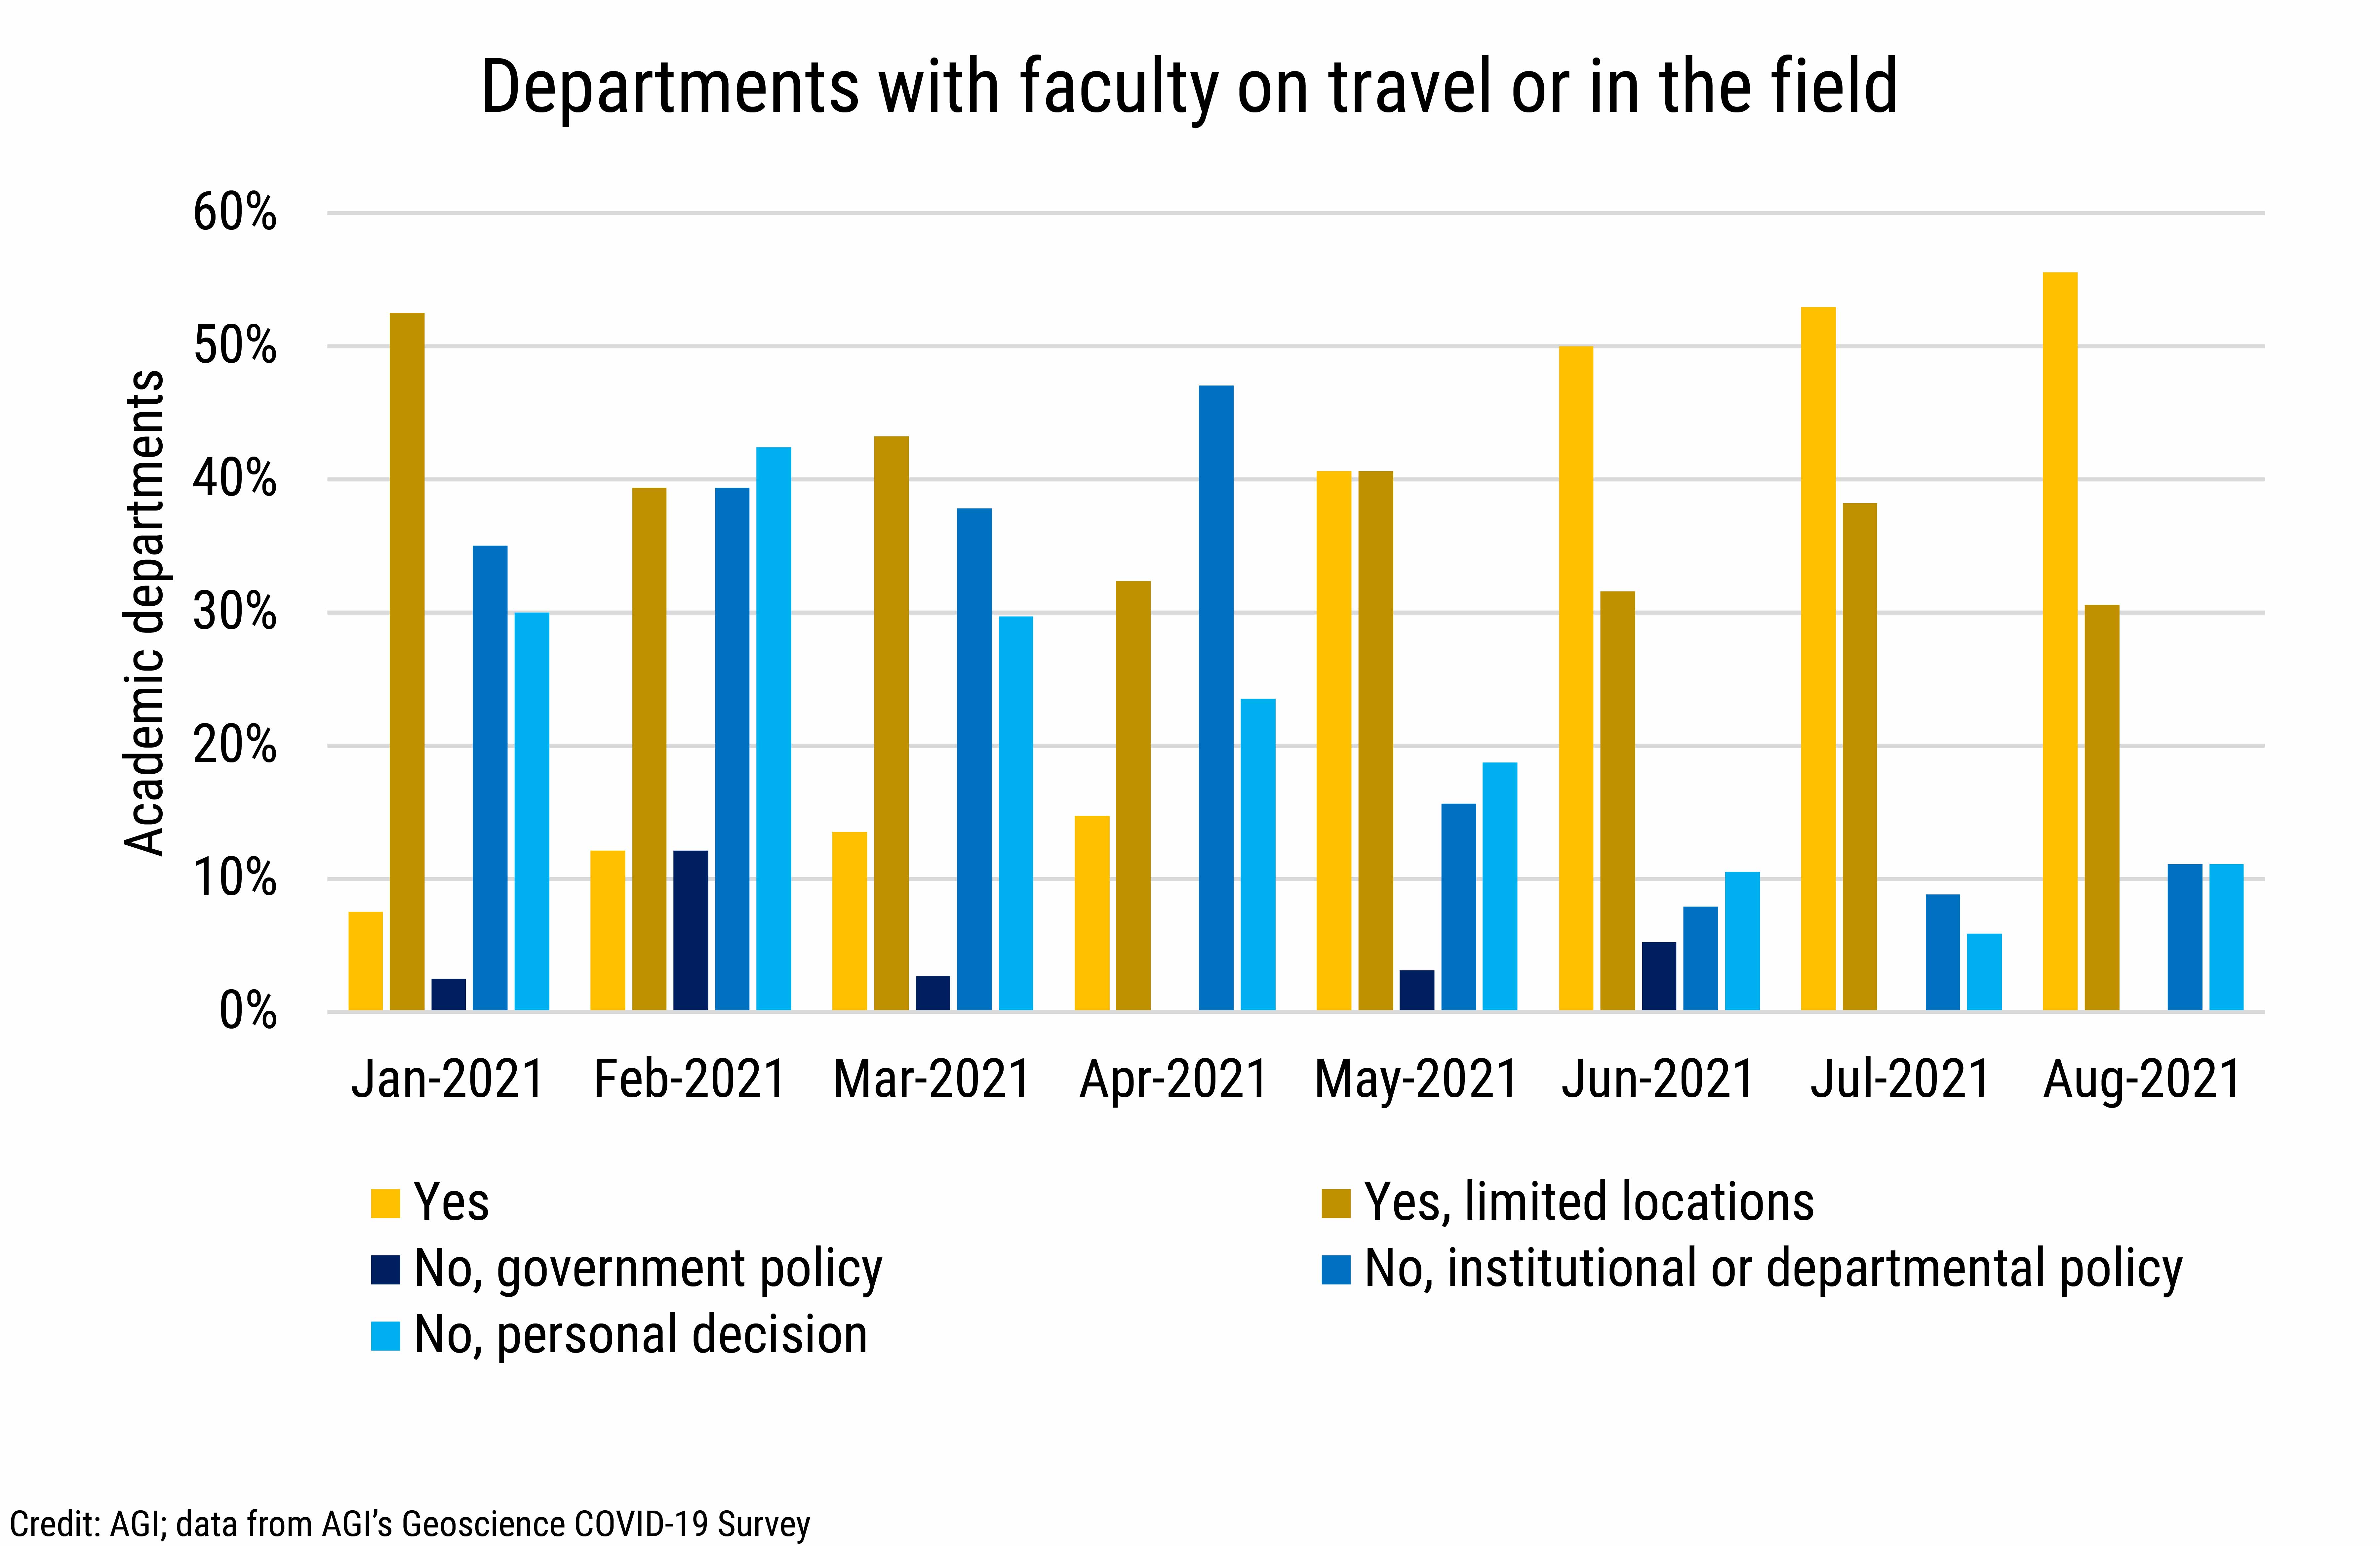 DB_2021-028 chart 03: Departments with faculty on travel or in the field (Credit: AGI; data from AGI's Geoscience COVID-19 Survey)